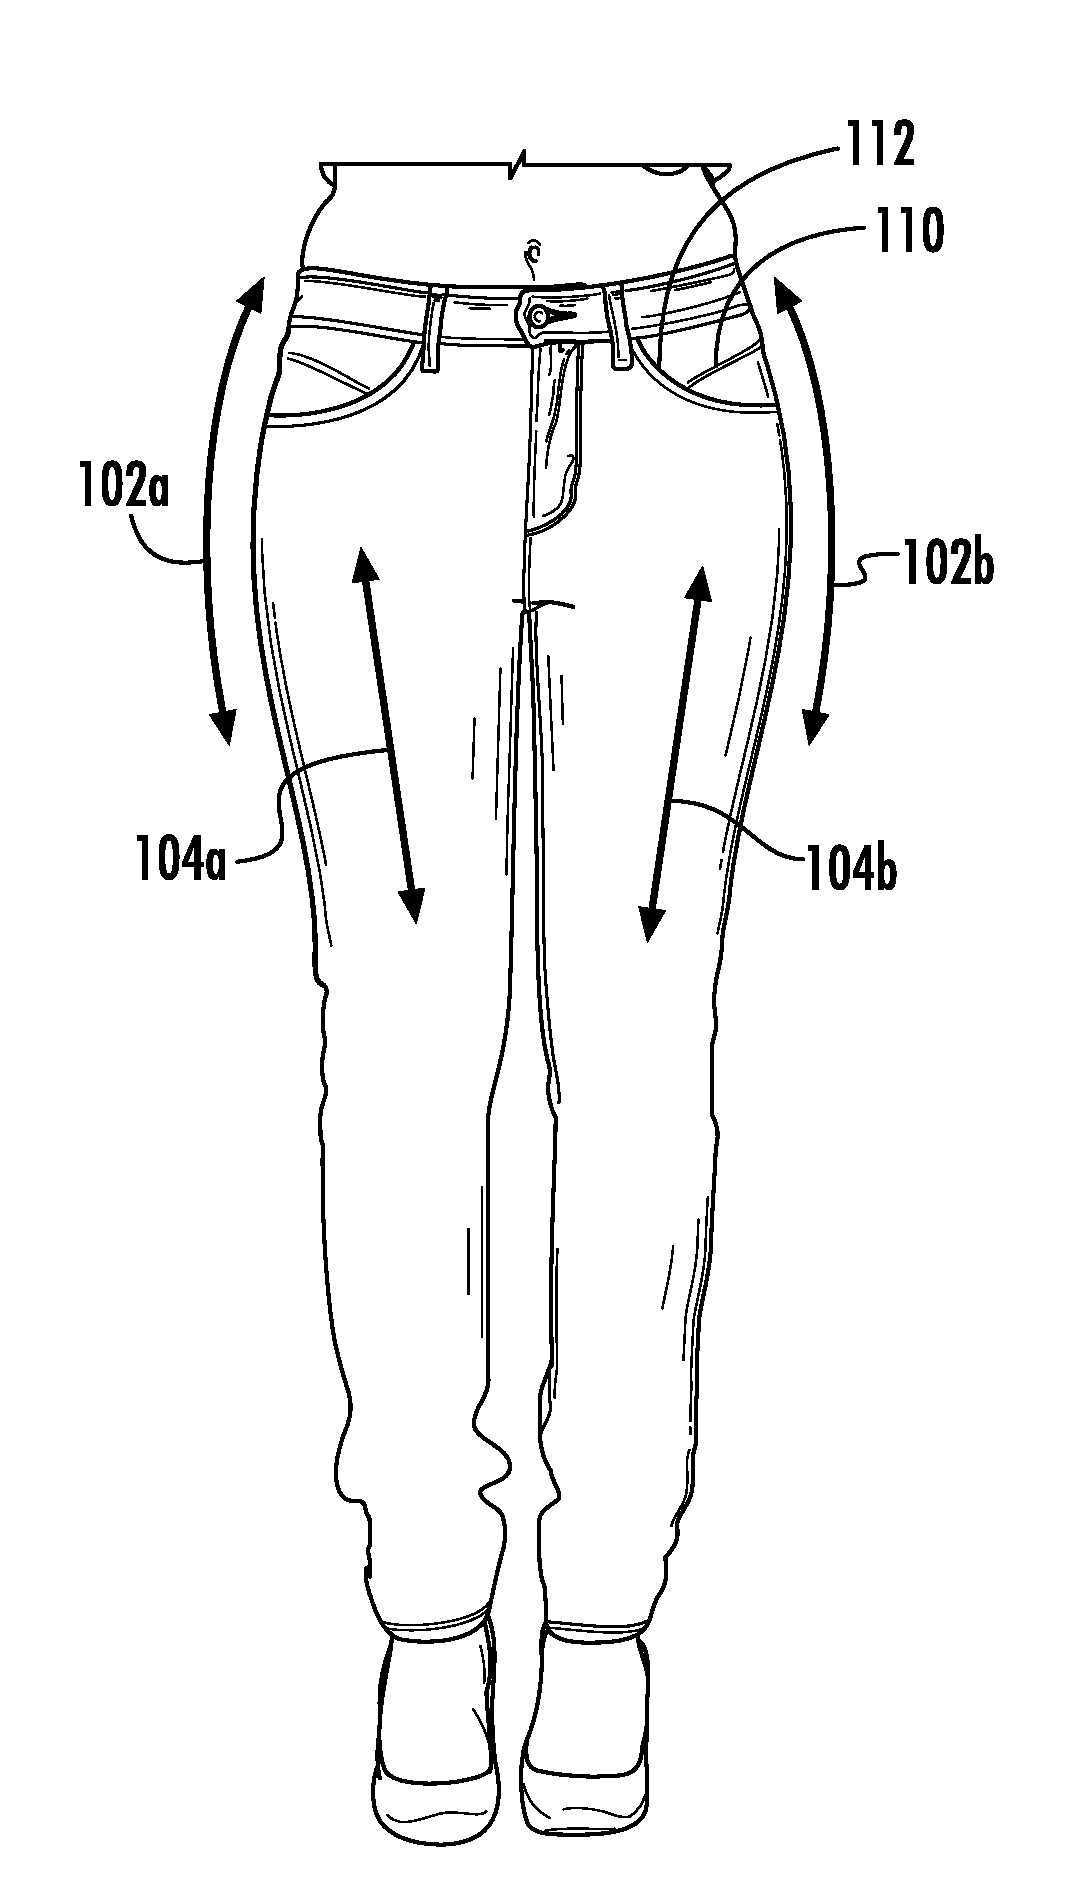 Shaped Fit Sizing System with Body Shaping